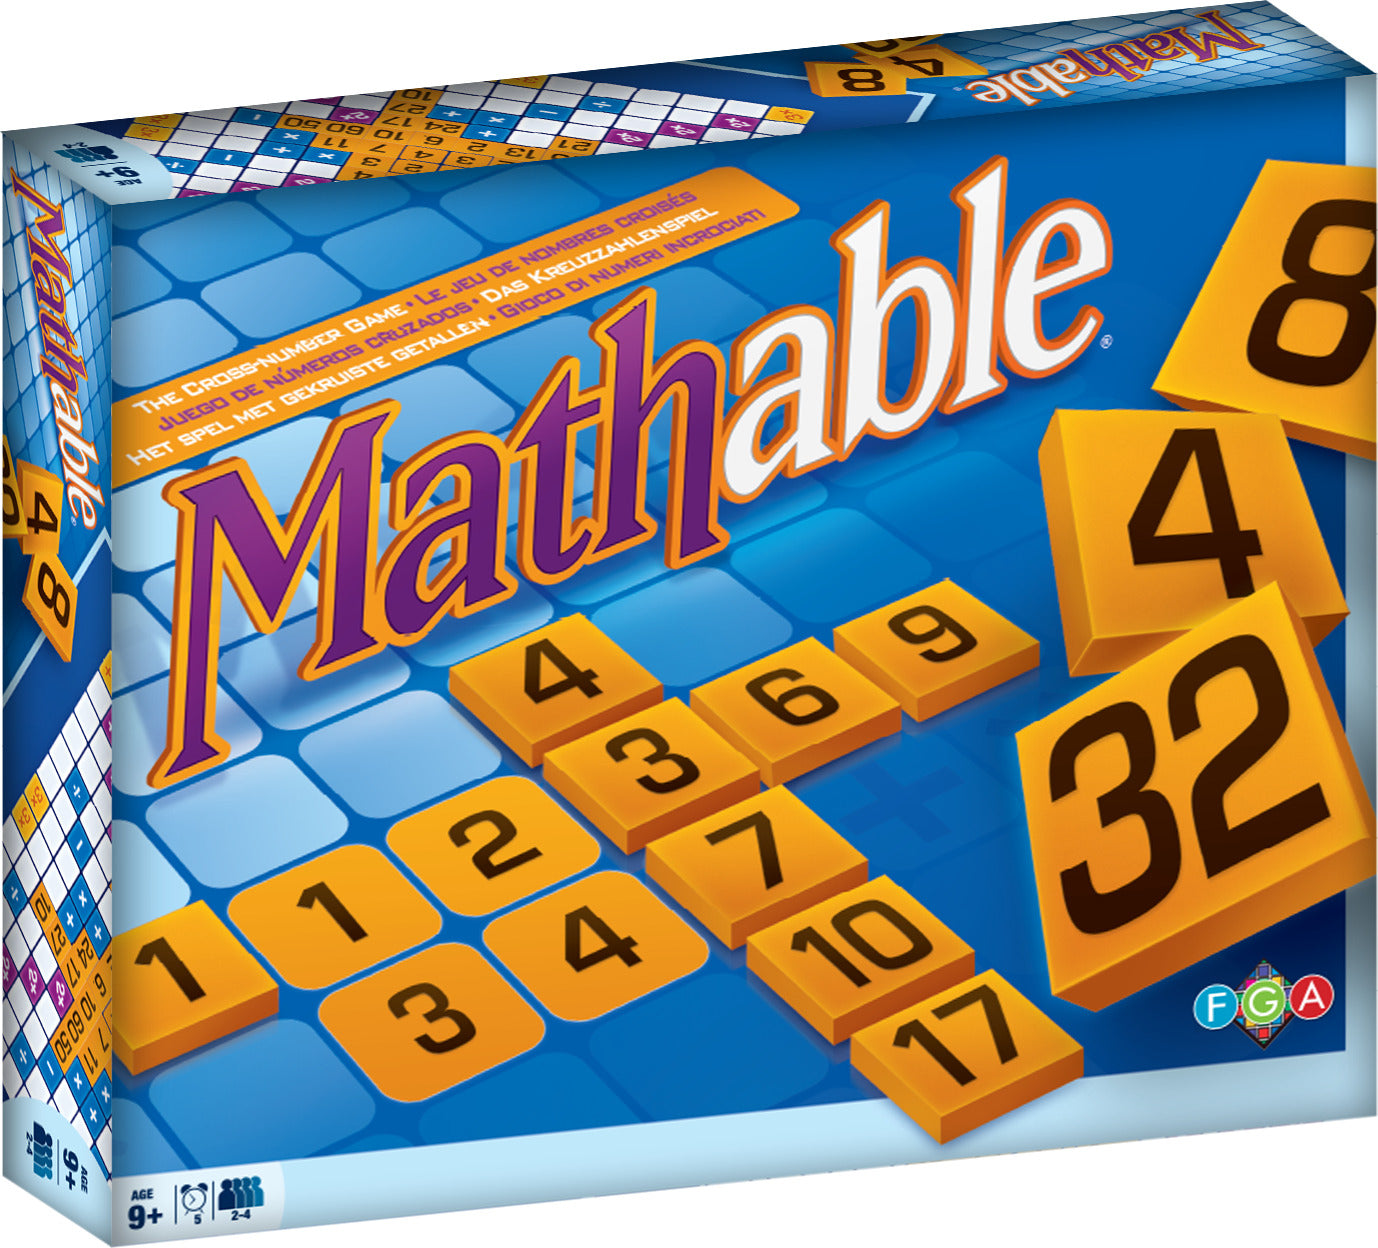 Mathable Classic